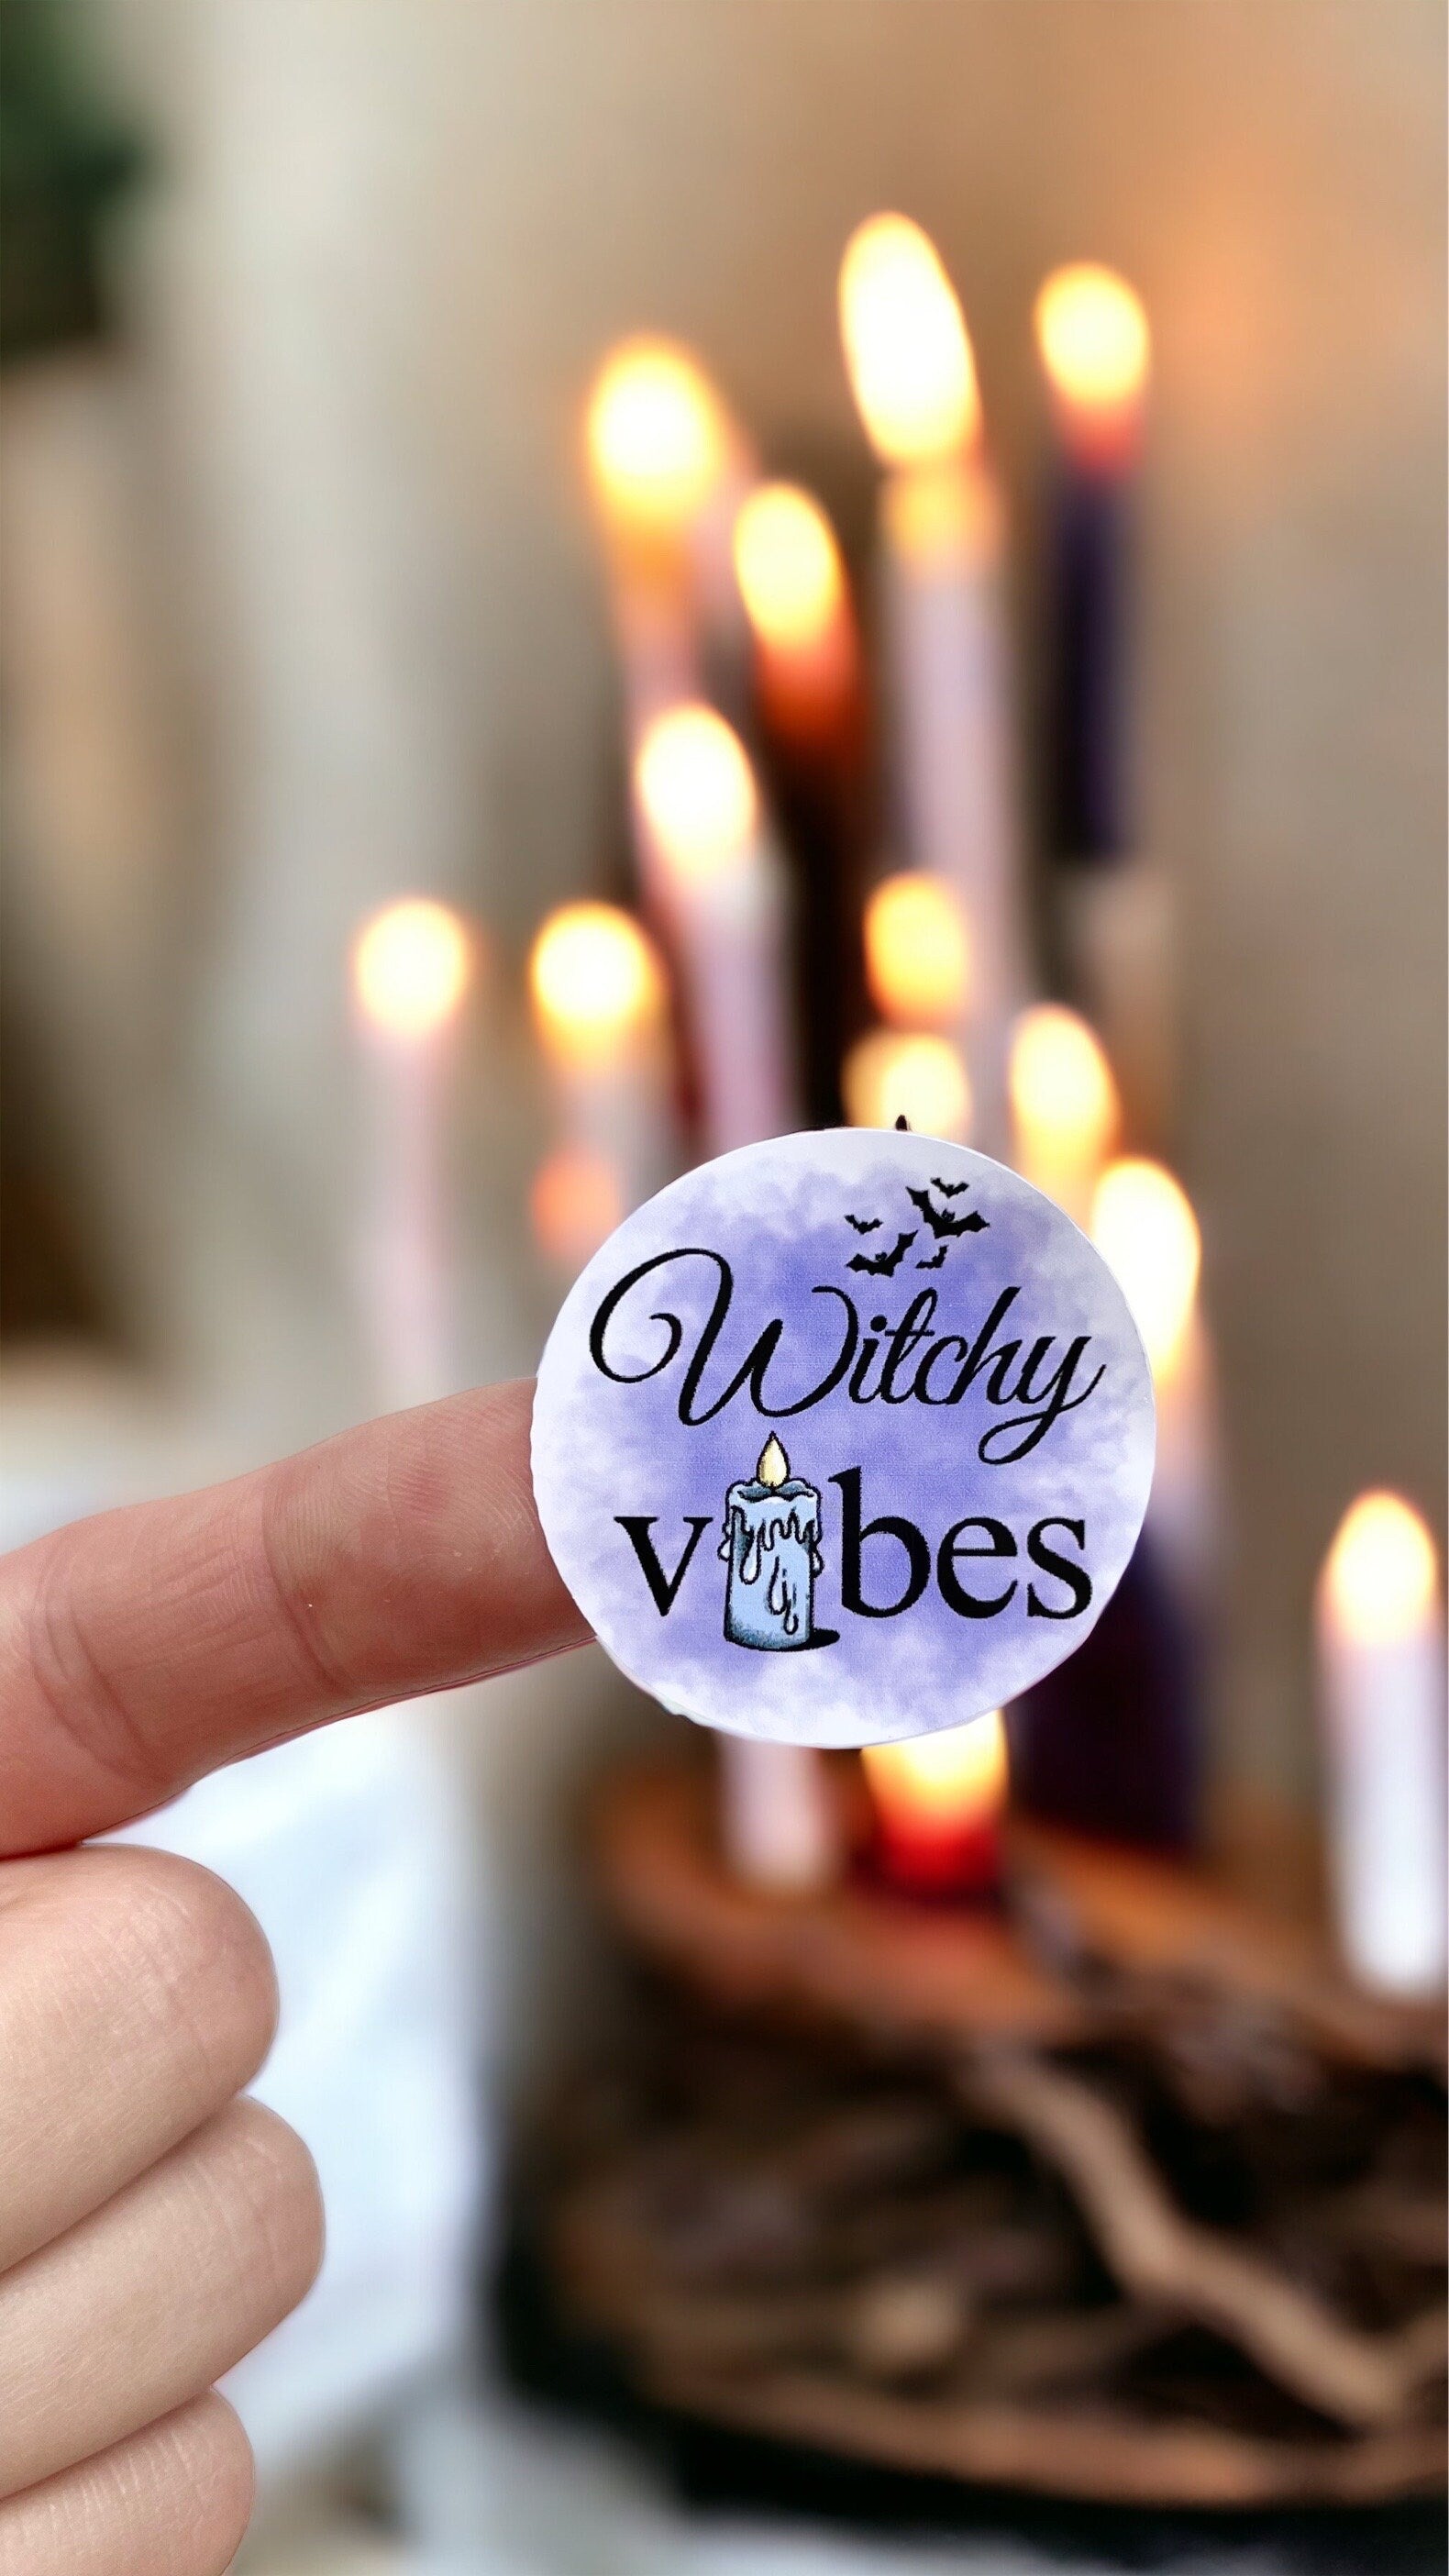 Witchy Vibes Sticker | 38mm Stickers | Witch Sticker | Magic Label | Notebook Planner Diary